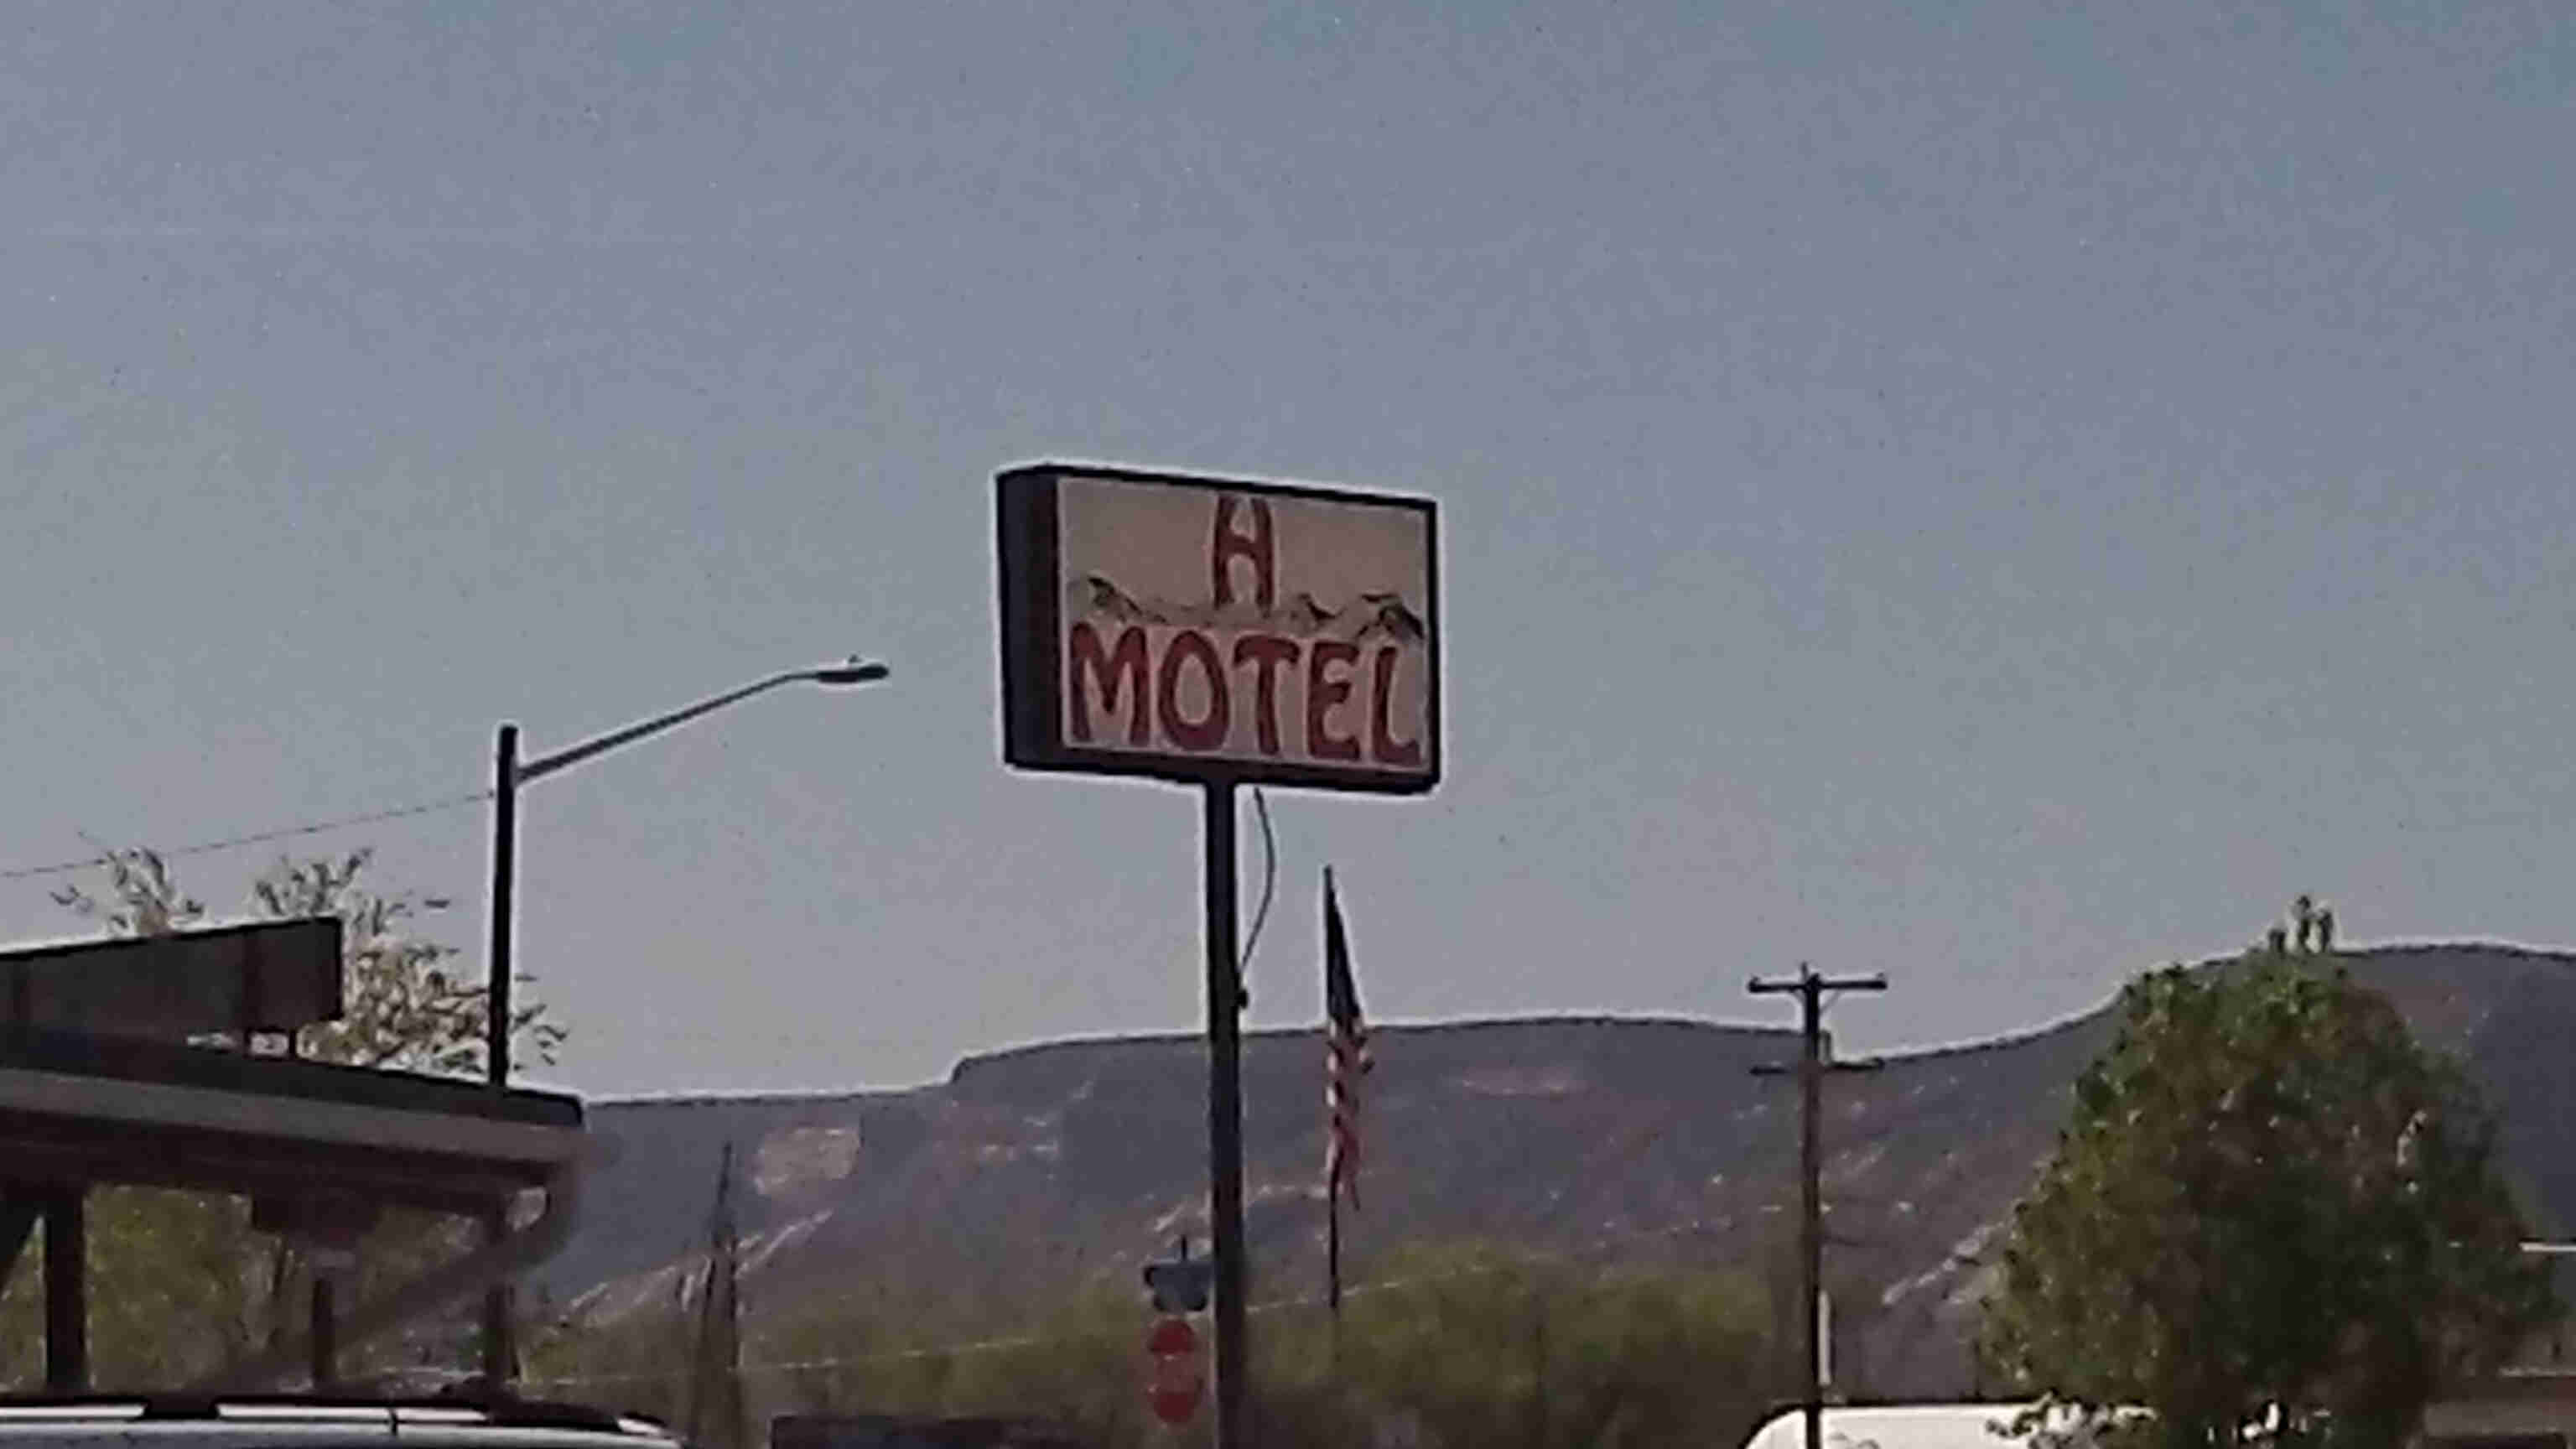 Front view of a sign for the H Motel, with desert buttes in the background